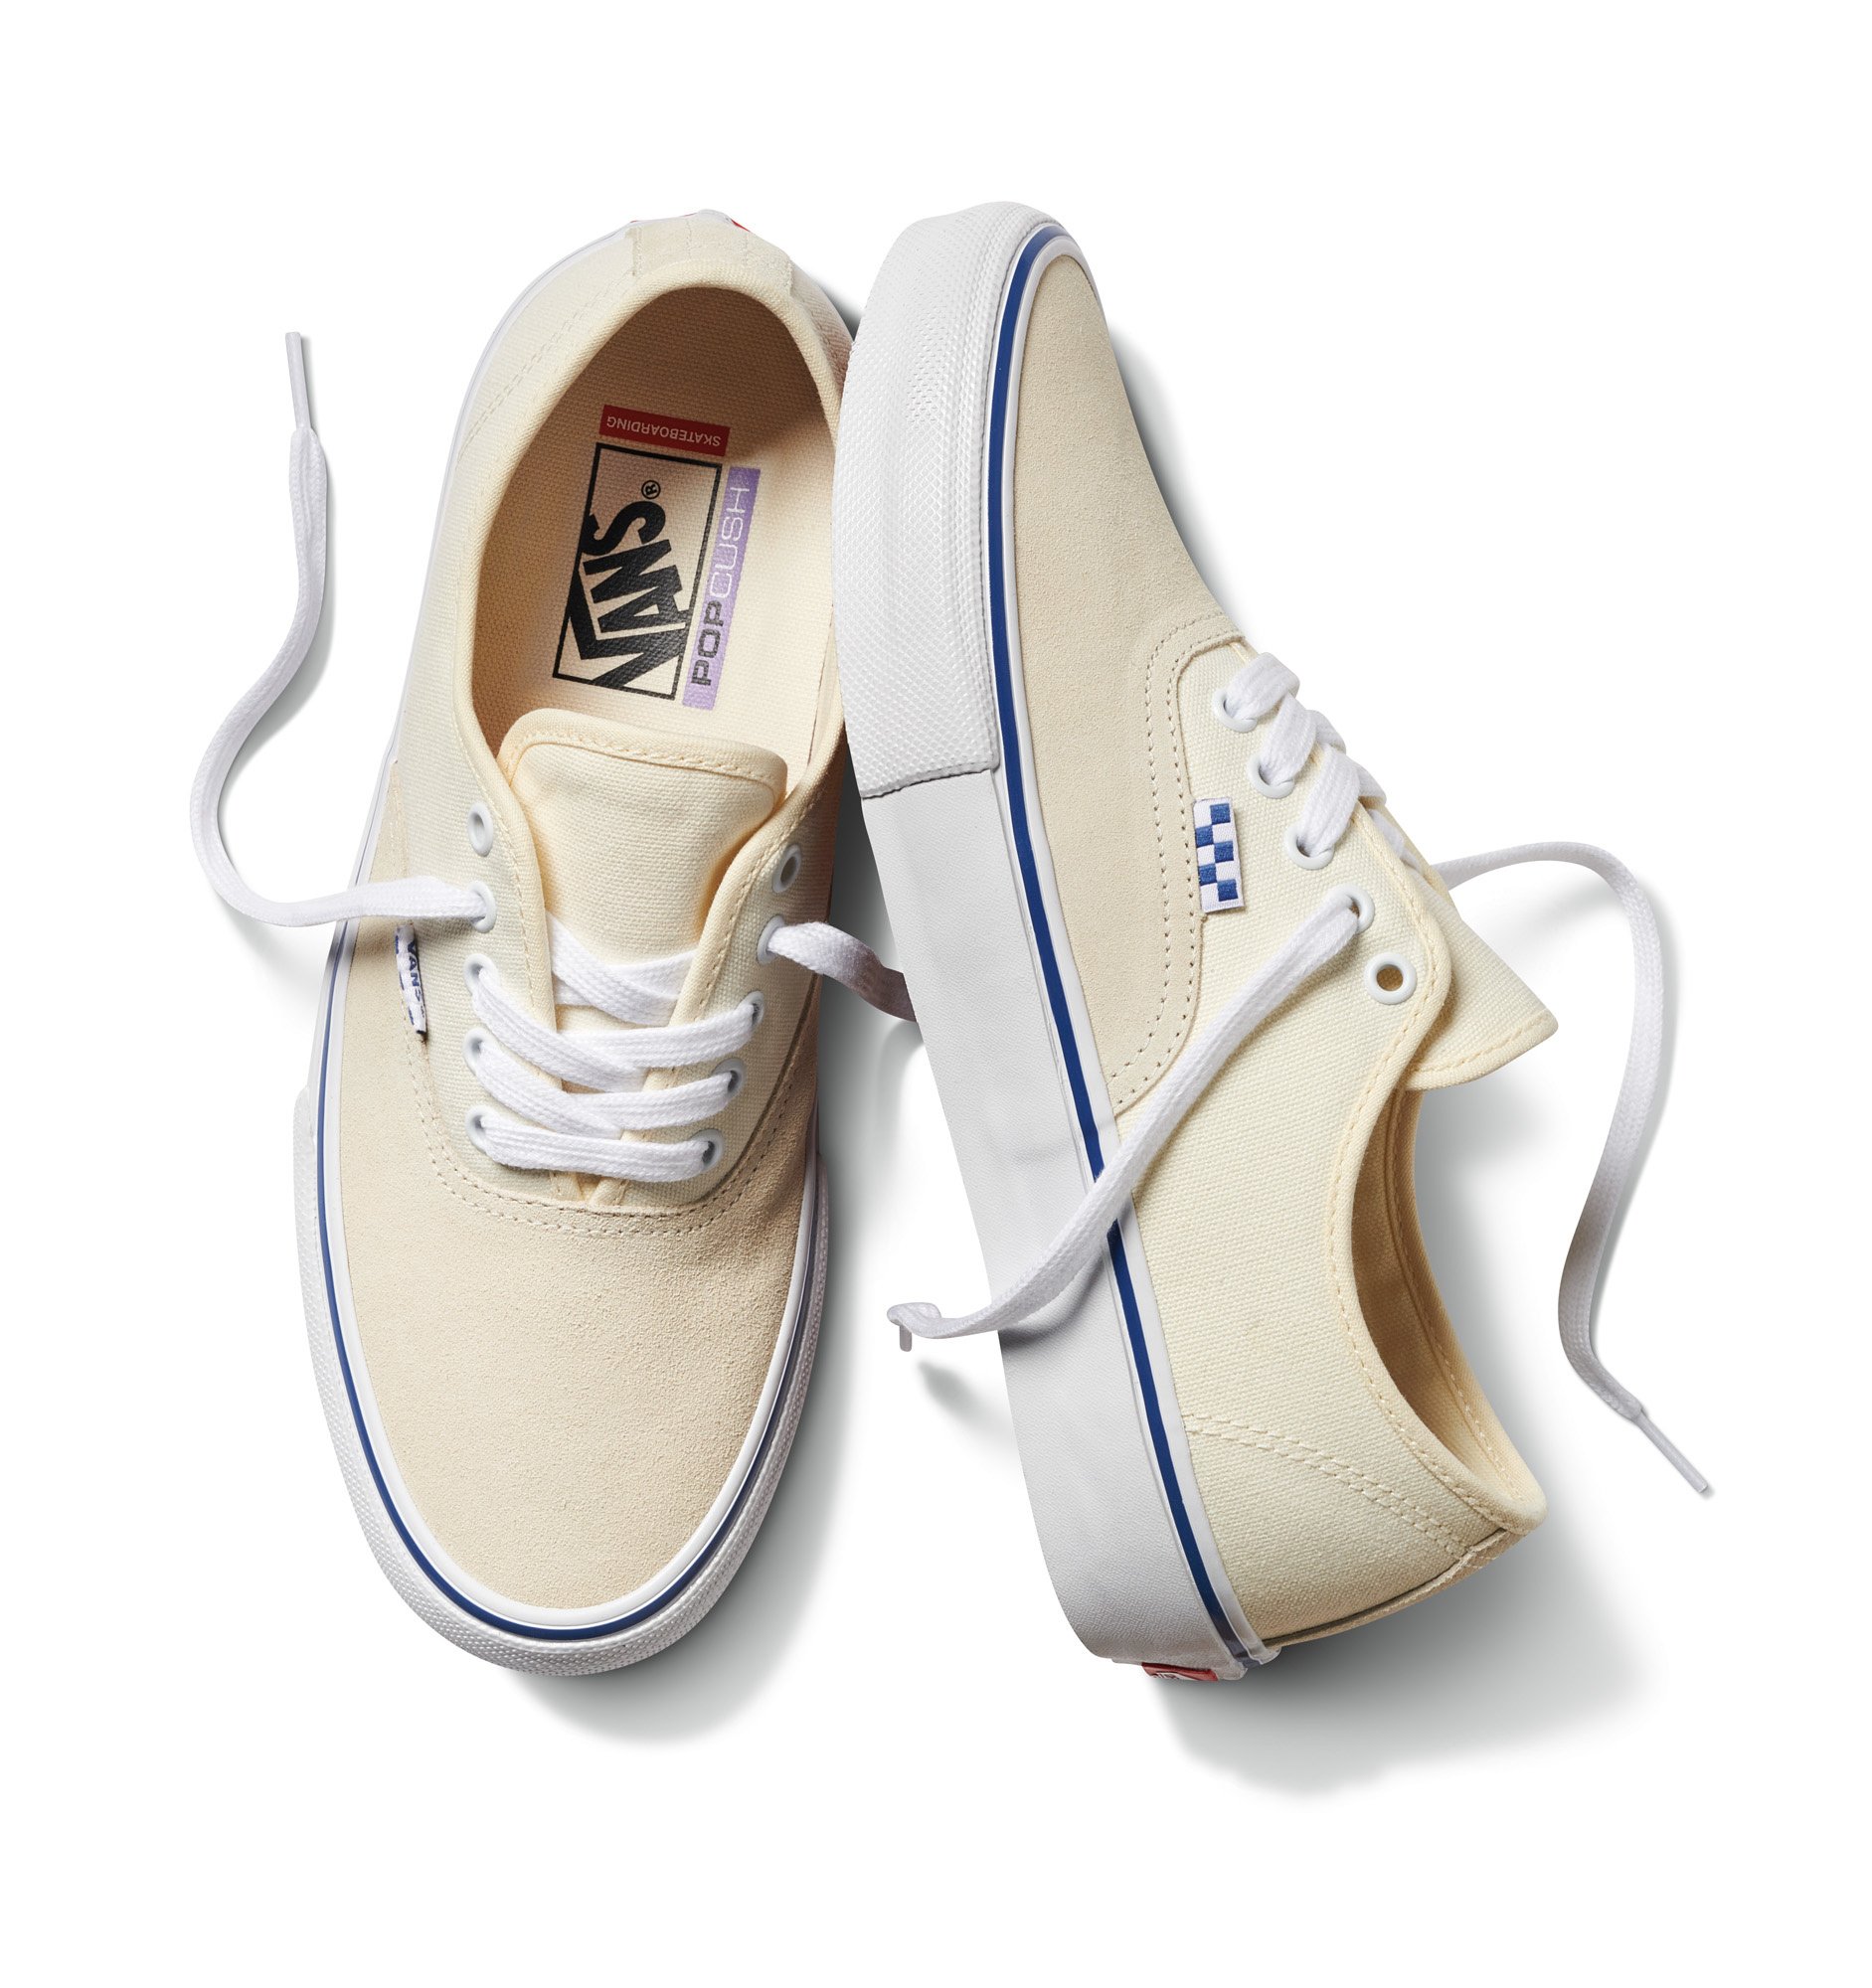 the new vans shoes